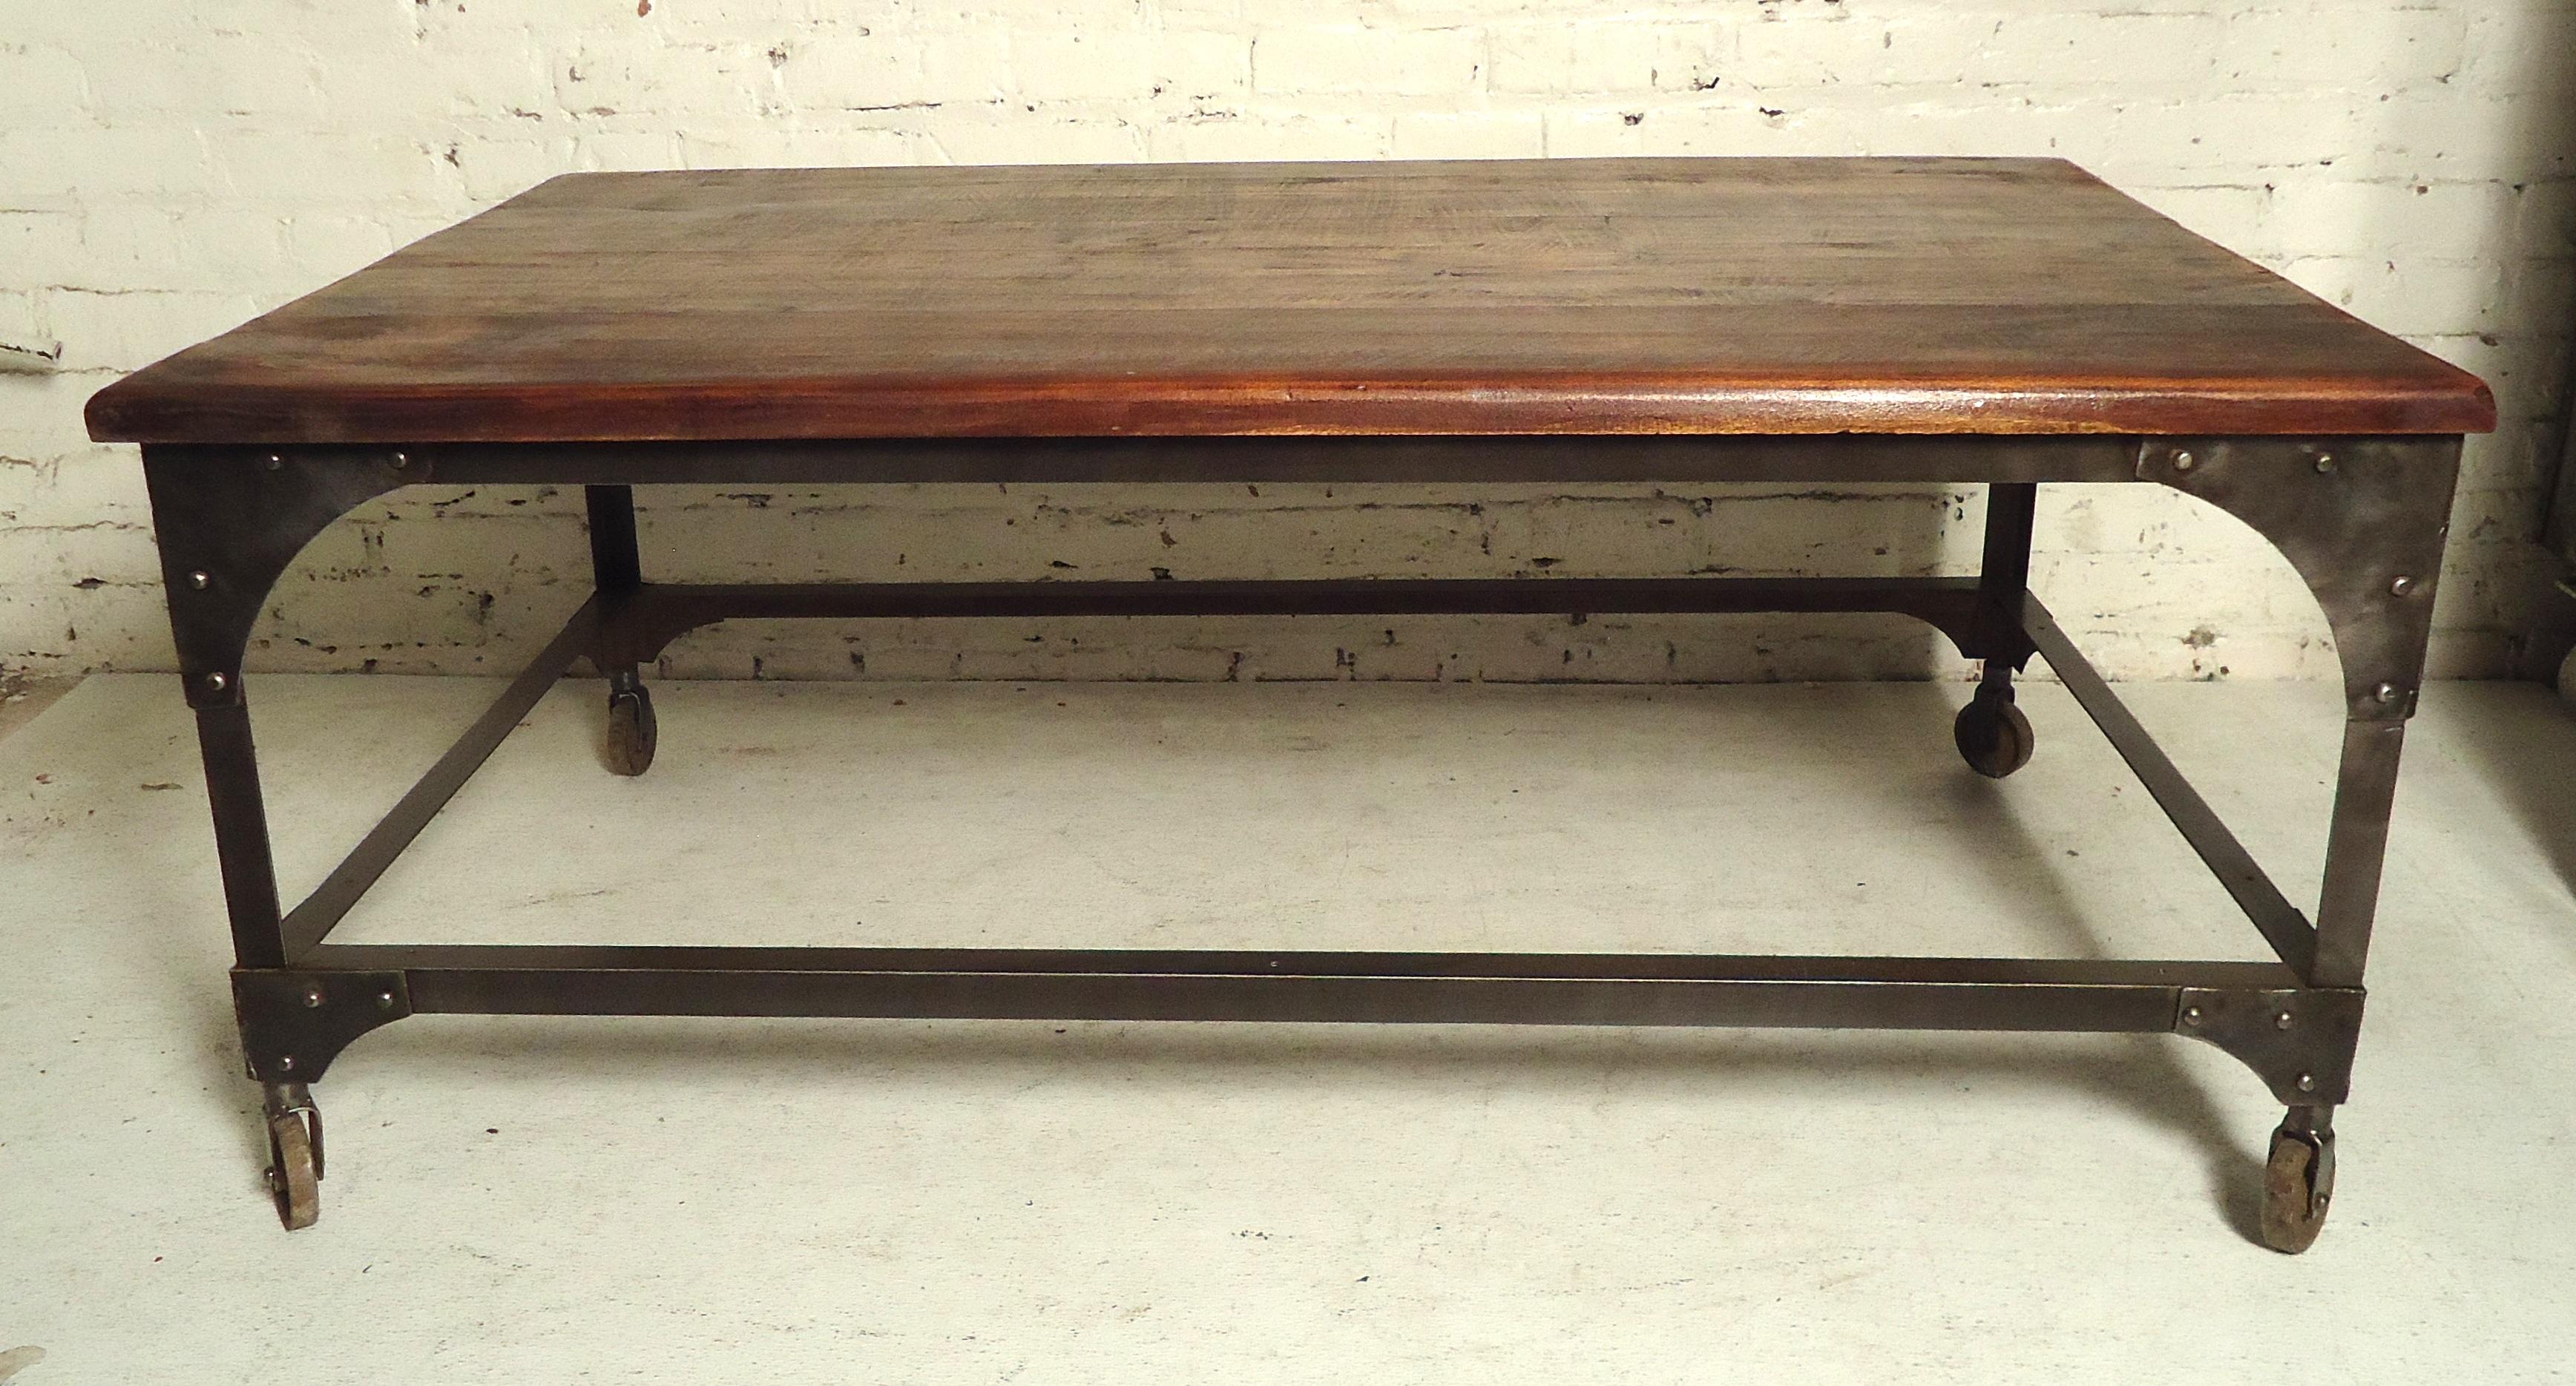 Metal frame base with a solid wood top given a rough rustic look. Exposed rivets and metal casters.

(Please confirm item location - NY or NJ - with dealer).
 